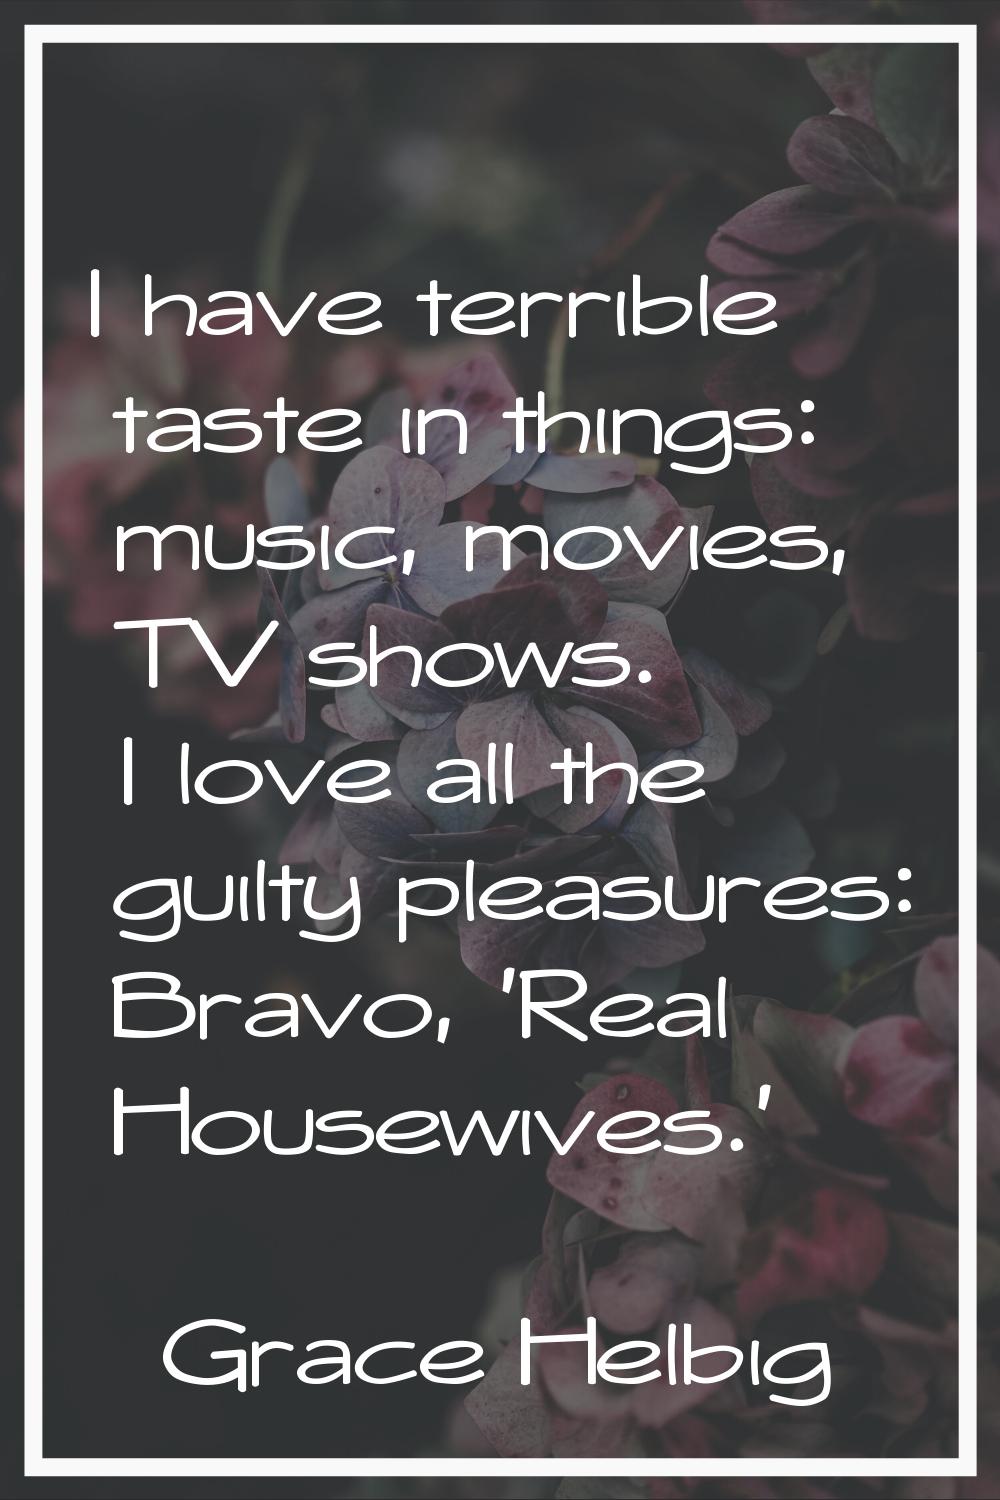 I have terrible taste in things: music, movies, TV shows. I love all the guilty pleasures: Bravo, '